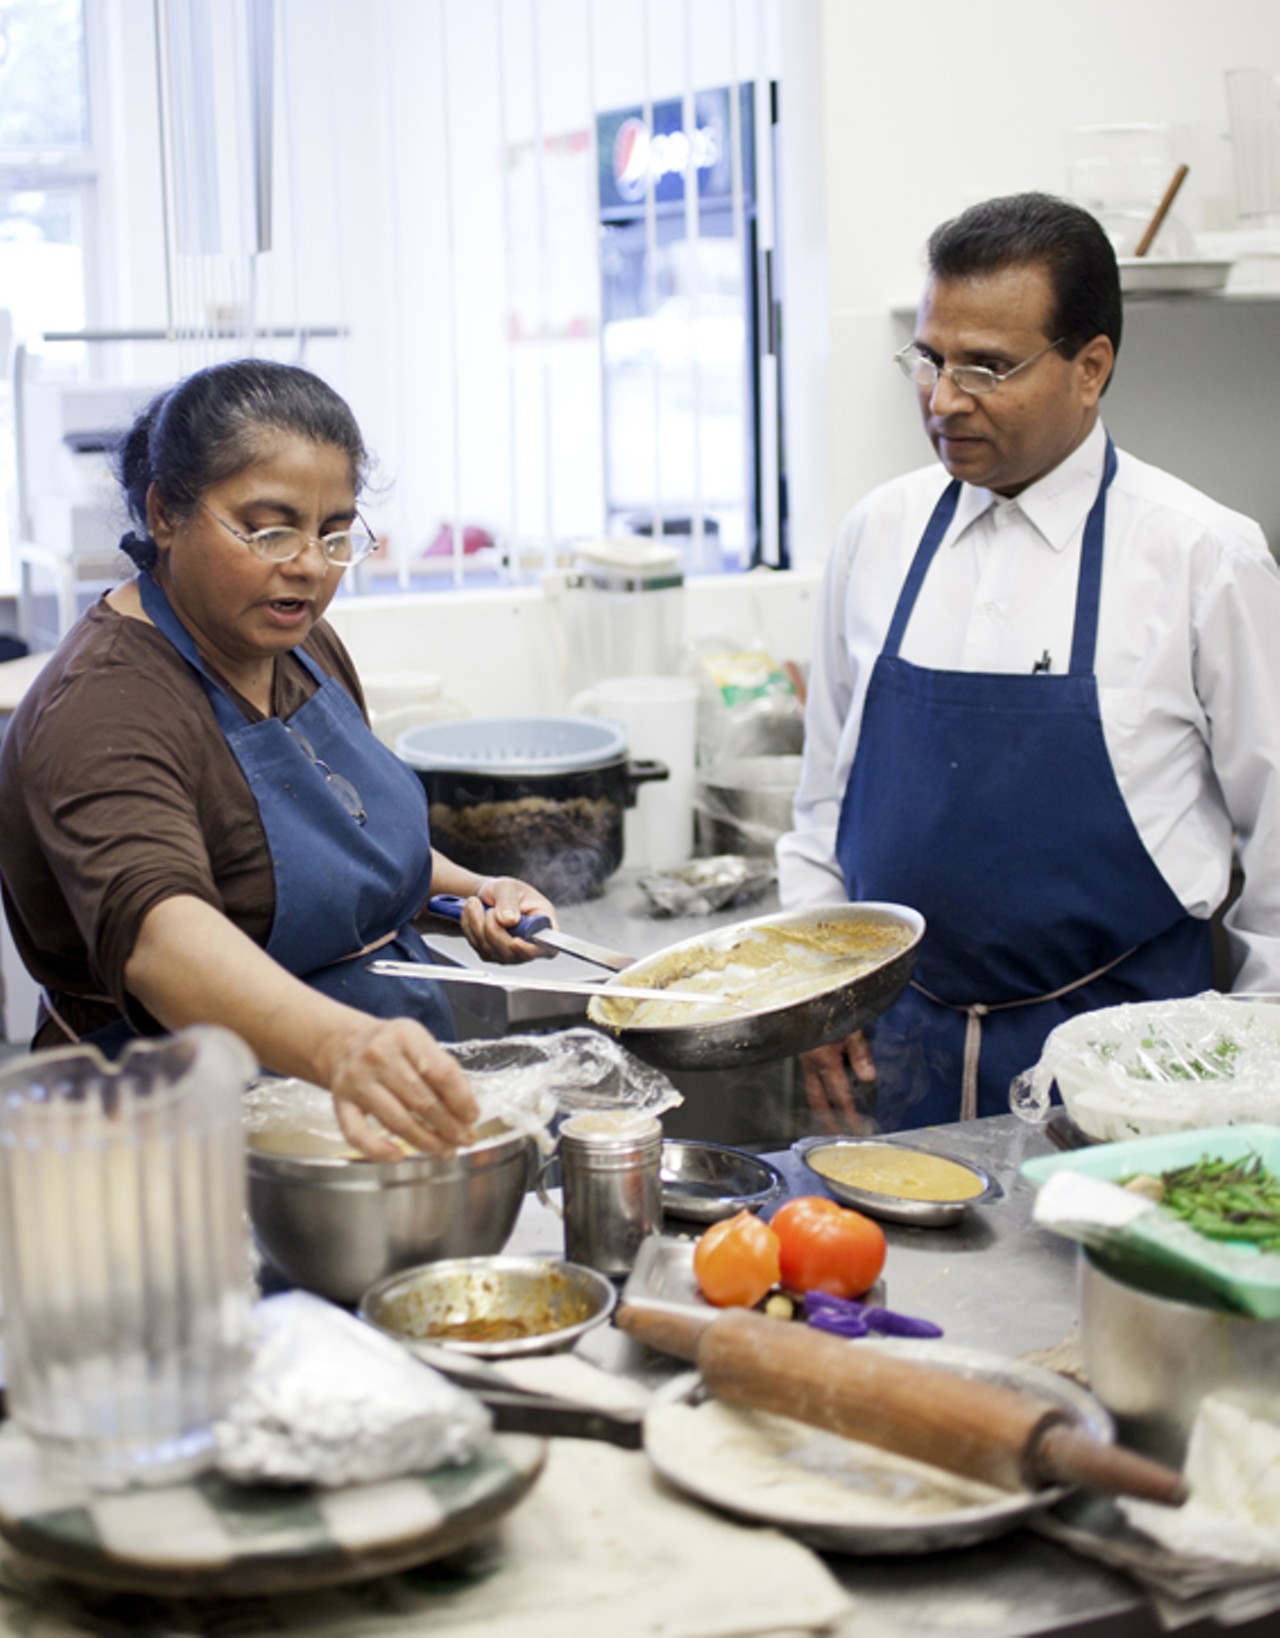 Shaheena and Zahid Khan at work in the Spice-n-Grill kitchen.